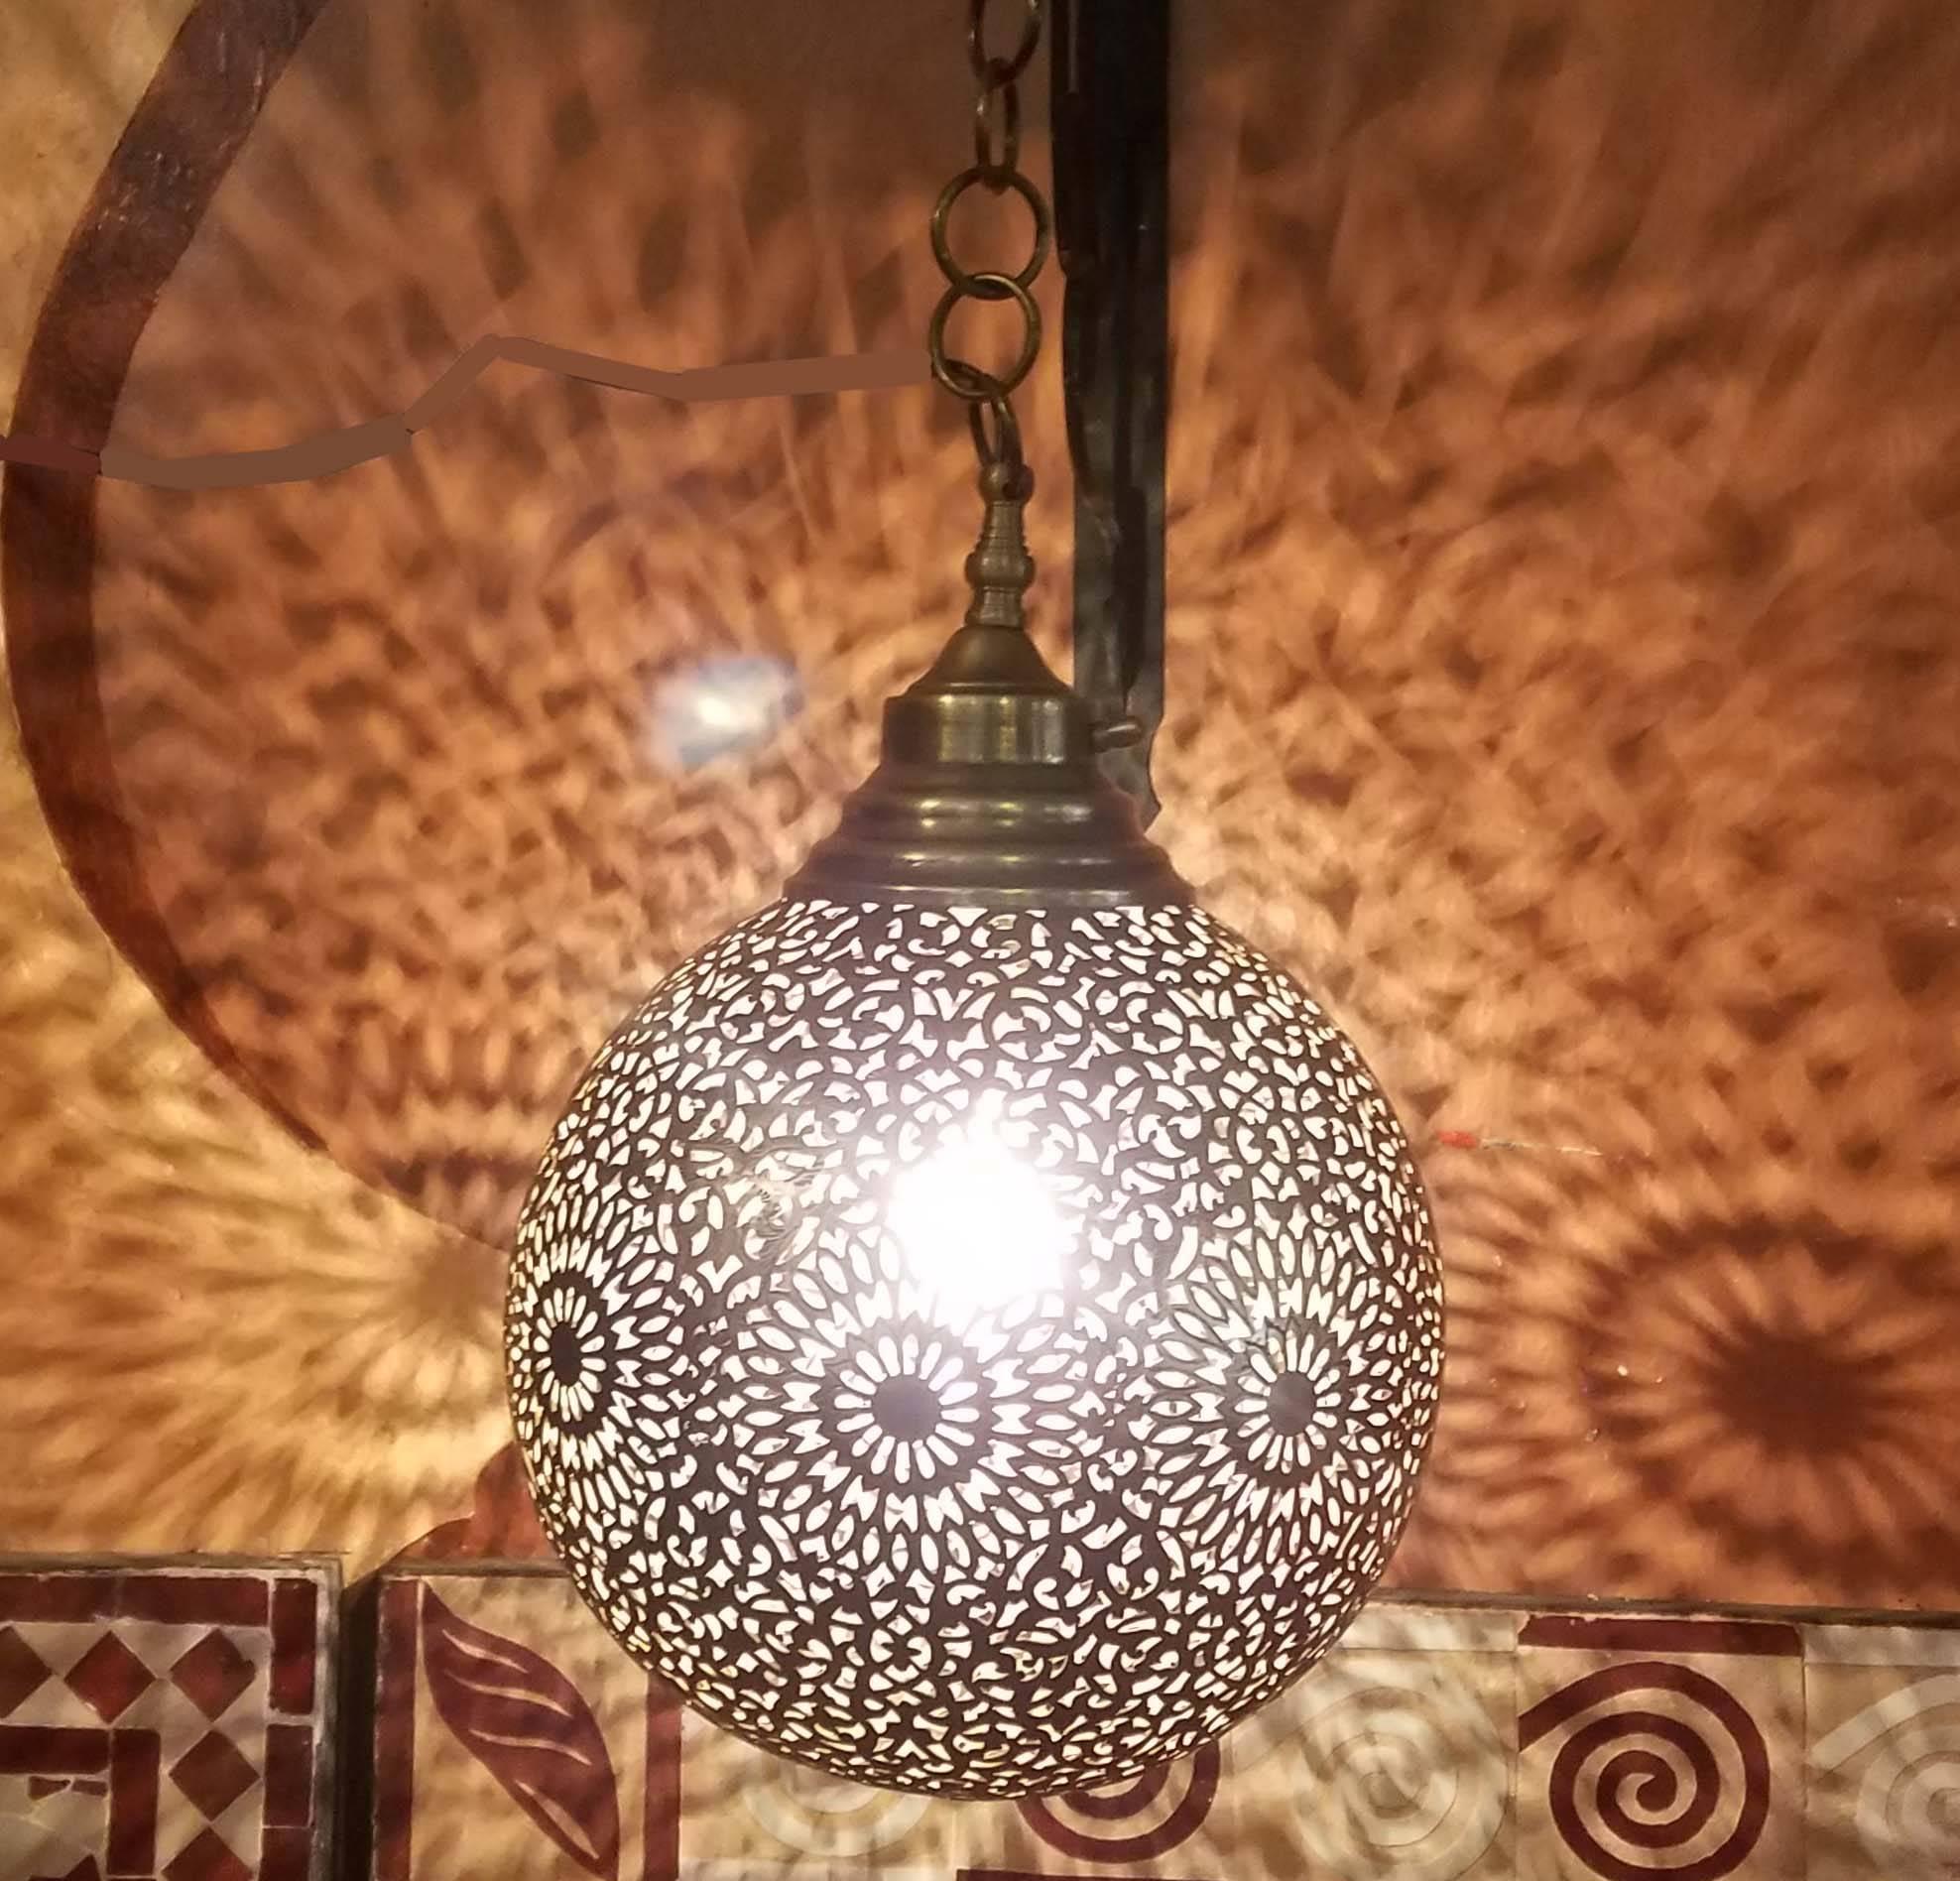 Made from pure copper, these beautiful Moroccan hanging lamps or lanterns are sure to be show-stoppers anywhere in your home. Each is handmade using ancient artisan methods which consist of puncturing the surface with a unique, elaborate design, so